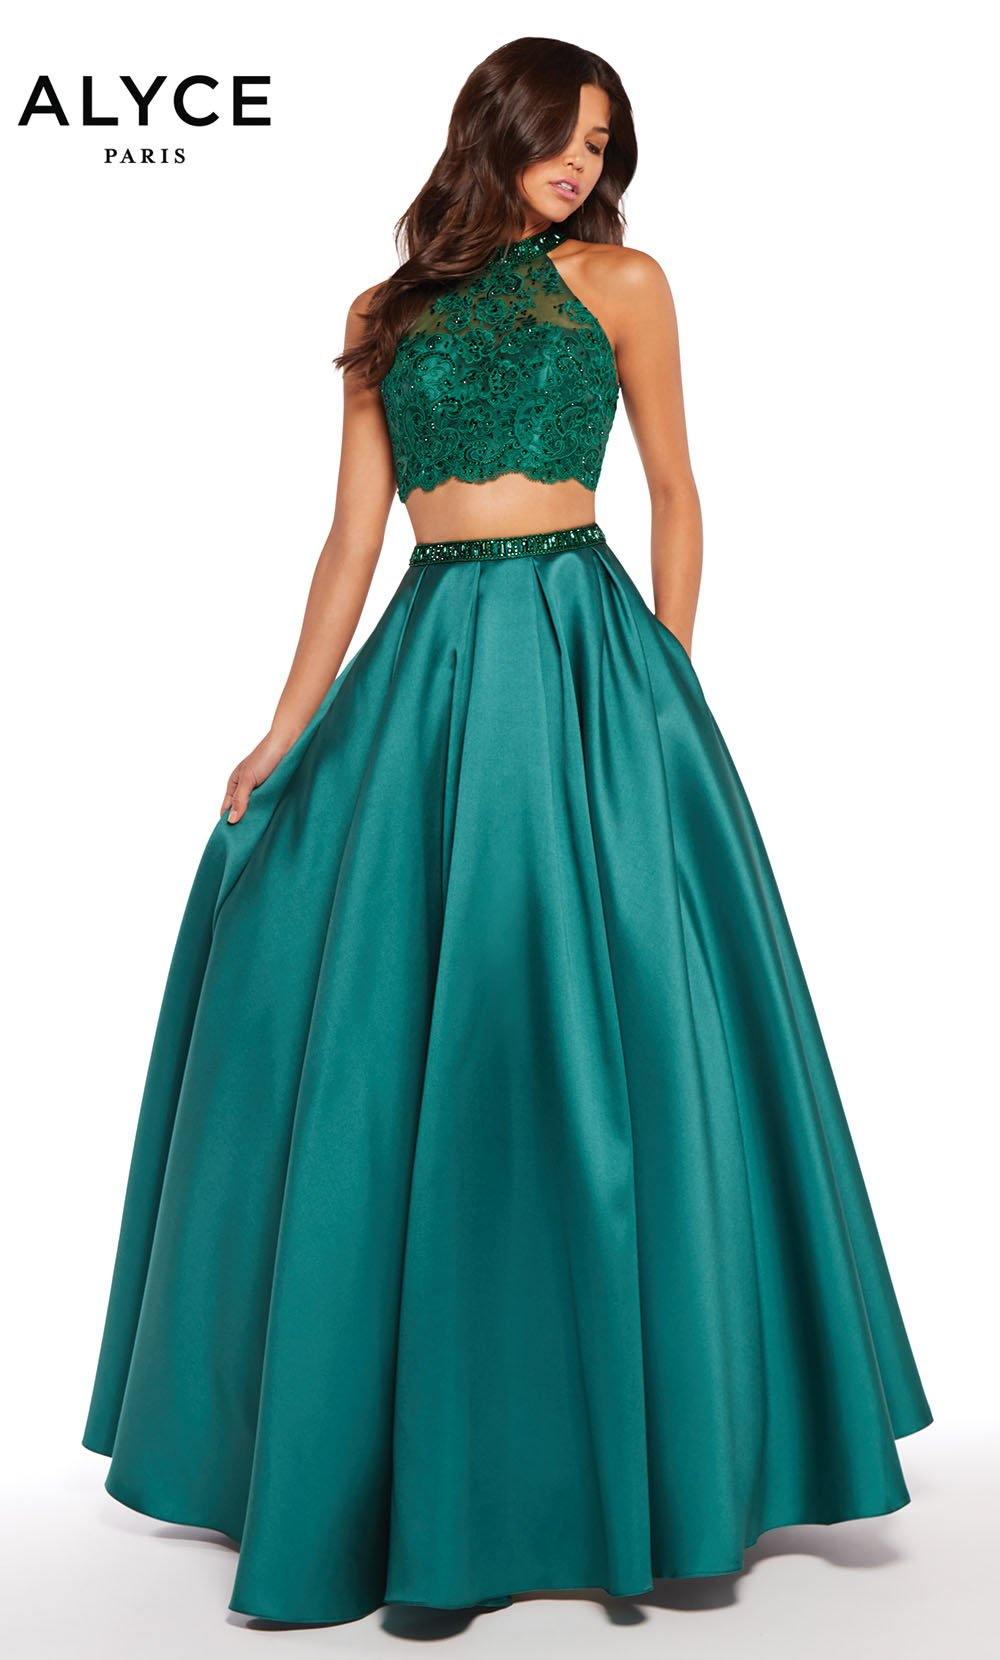 6 Tips For Successful Prom Dress Shopping - Alyce Paris